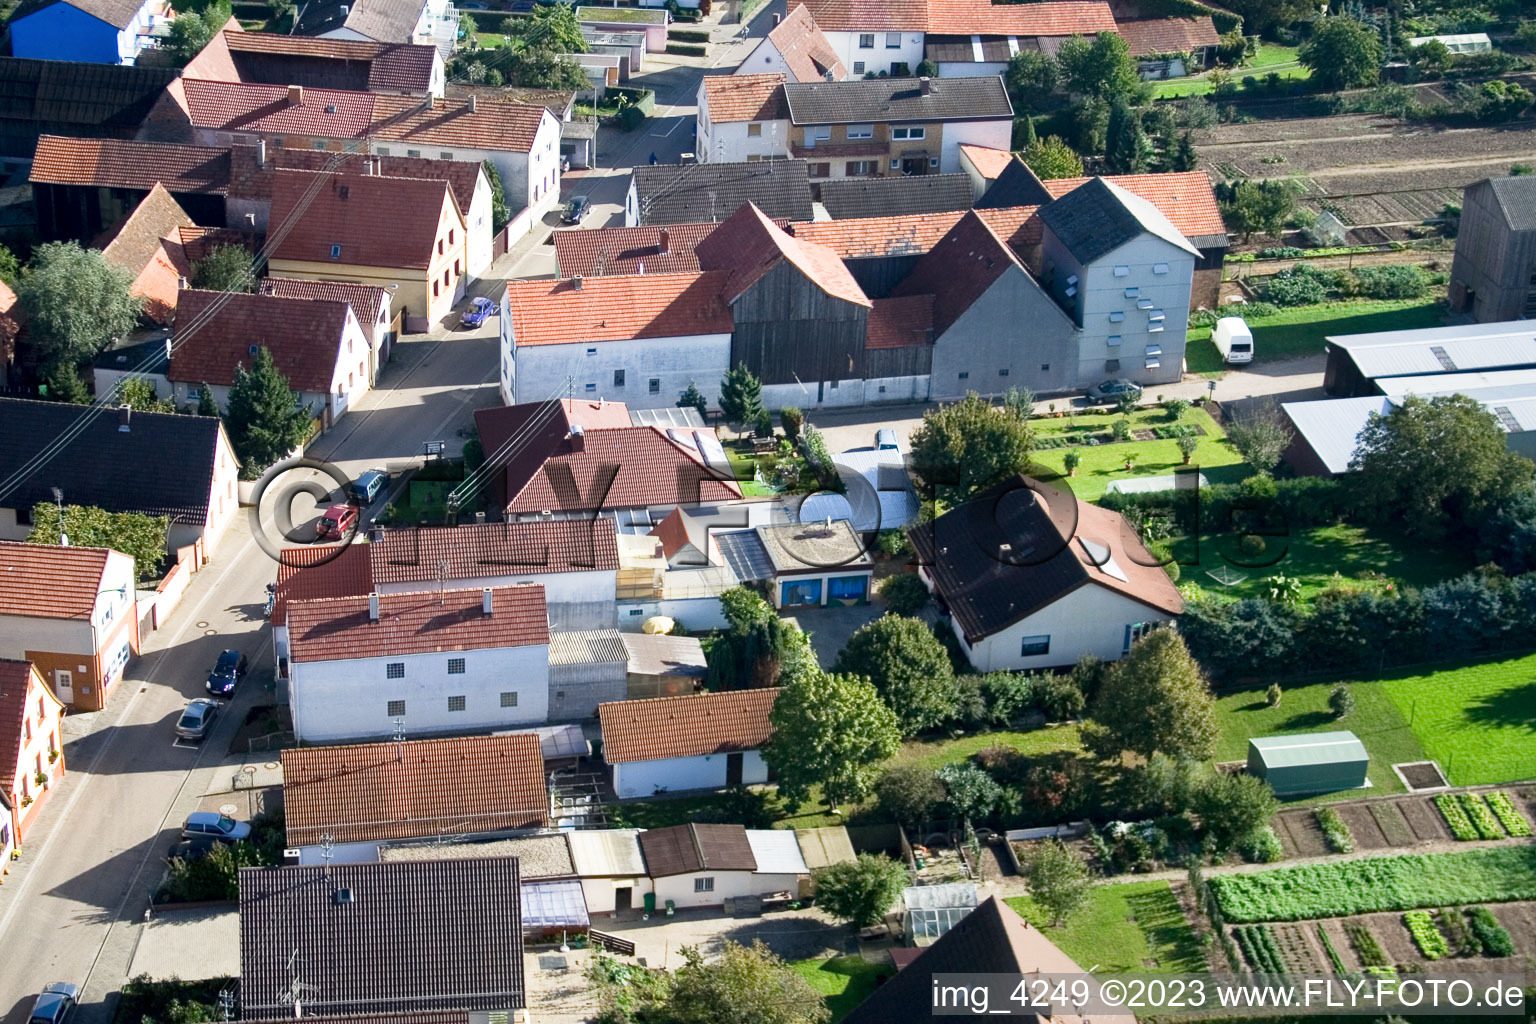 Aerial view of Brehmstr in the district Minderslachen in Kandel in the state Rhineland-Palatinate, Germany